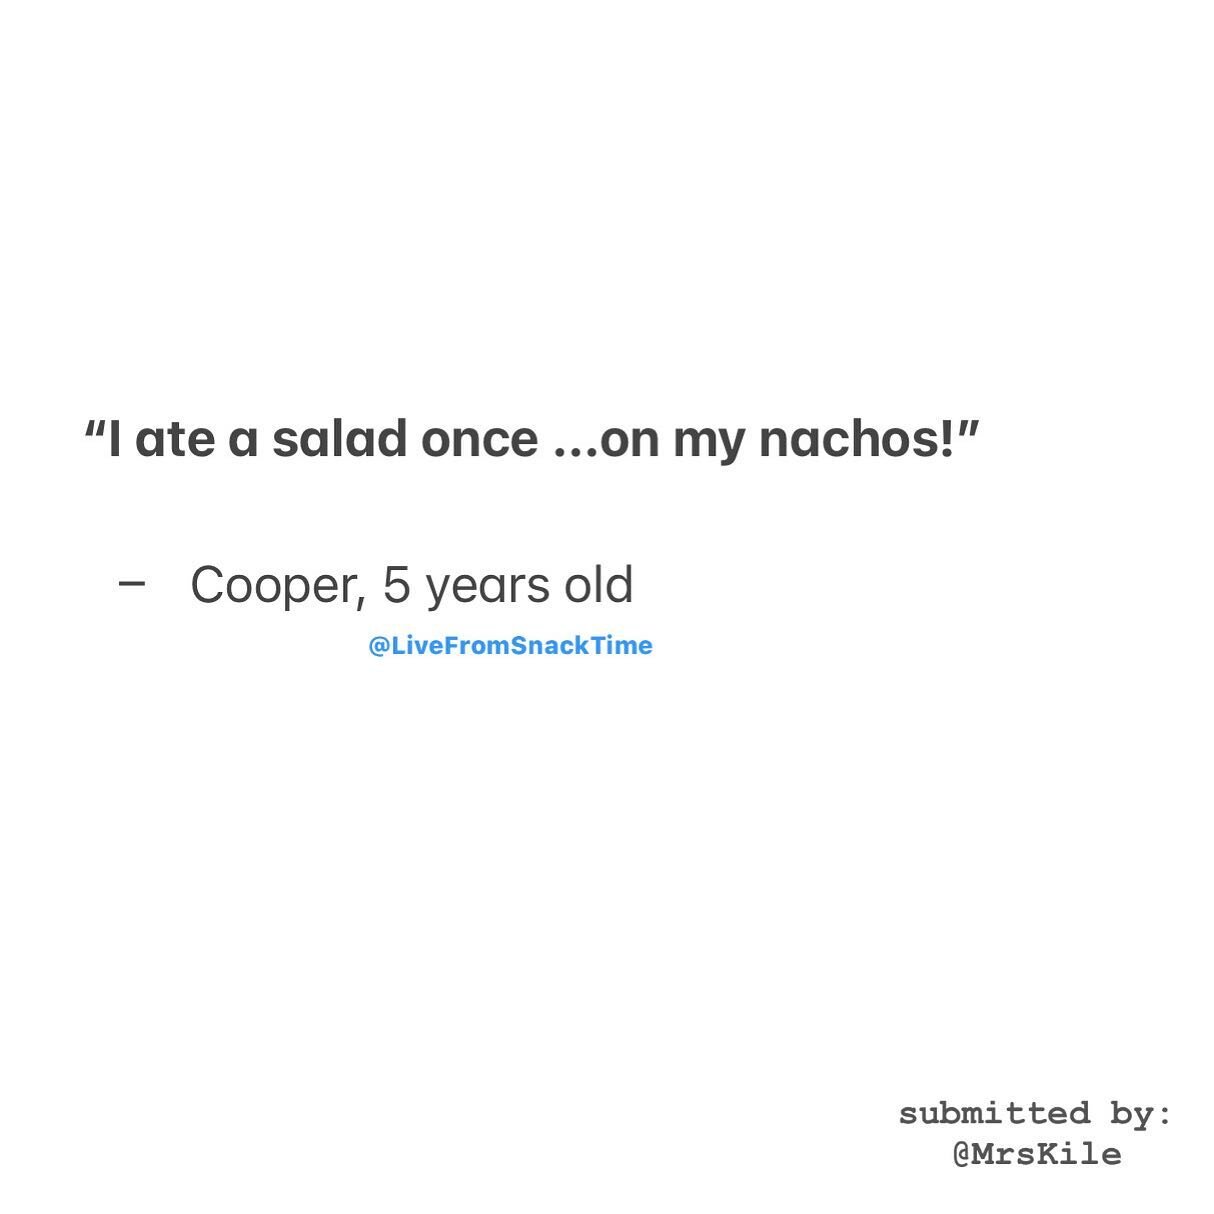 apparently salad is nacho friend, Cooper 🥗 
-
(submitted by: @mrskile) #nachos #salad